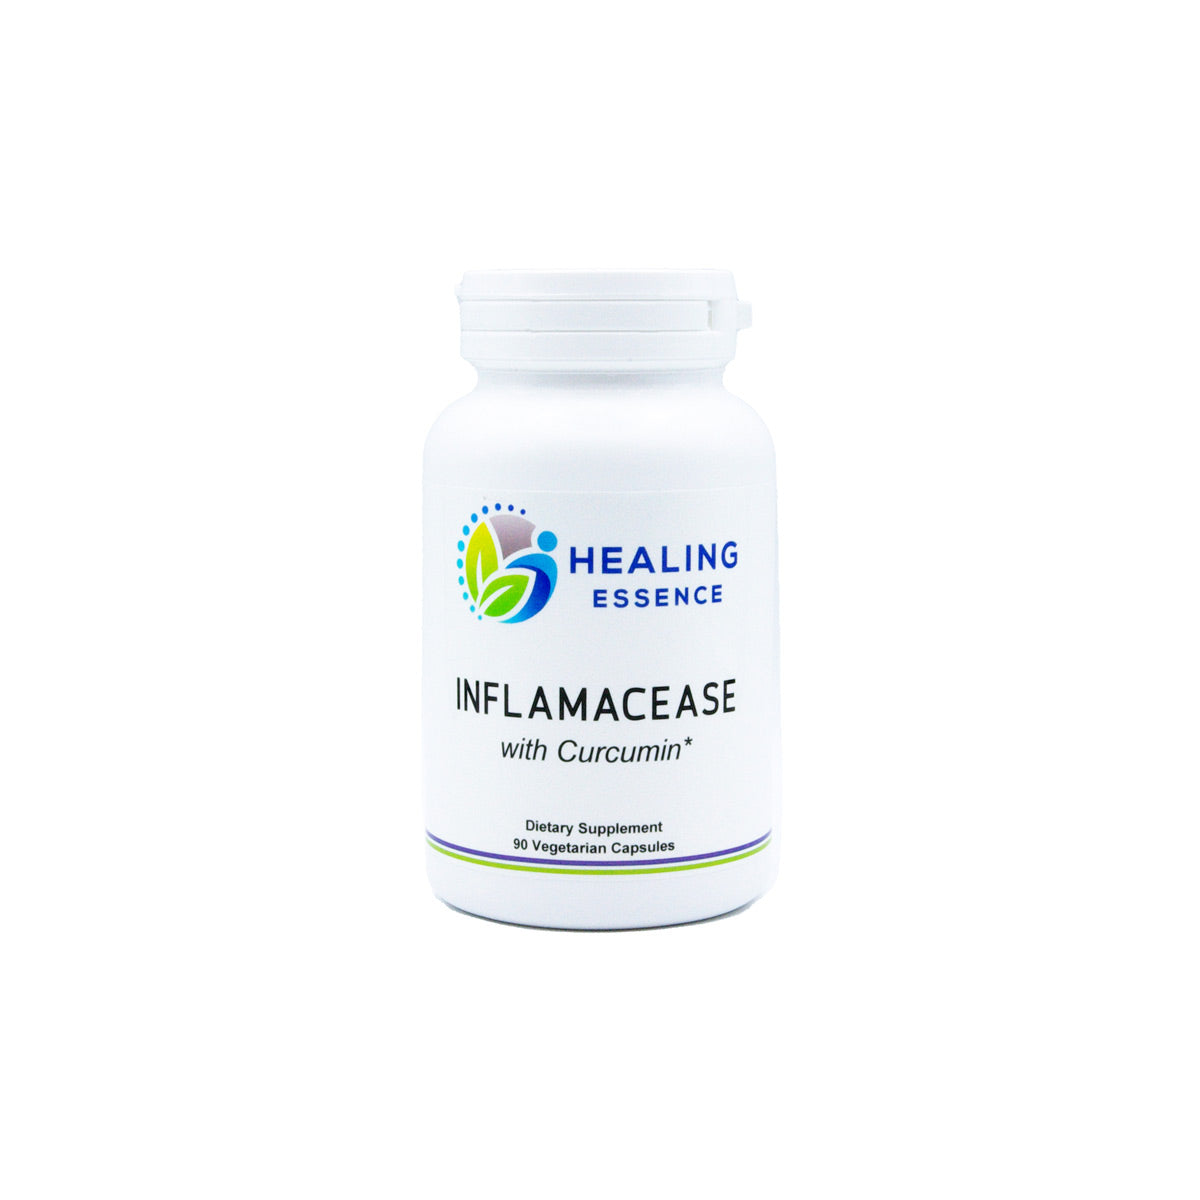 InflamaCease (with Curcumin)